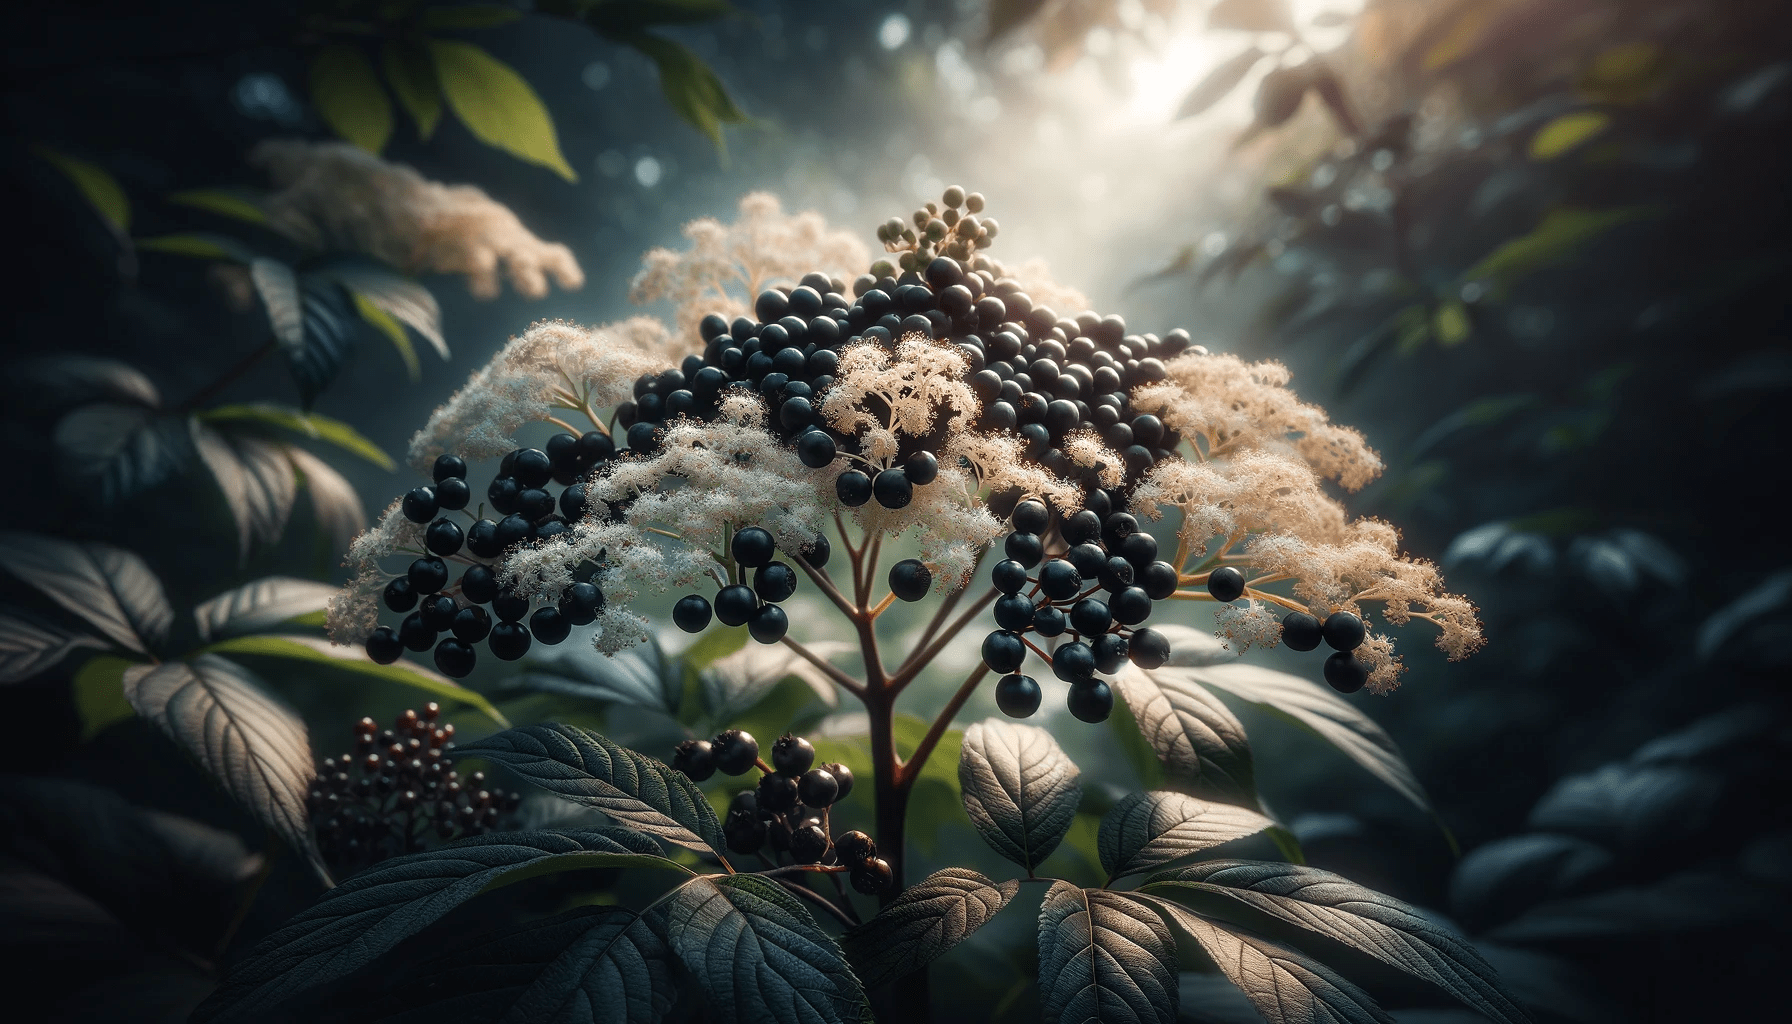 Black Elderberry: A Natural Remedy for Cold and Flu